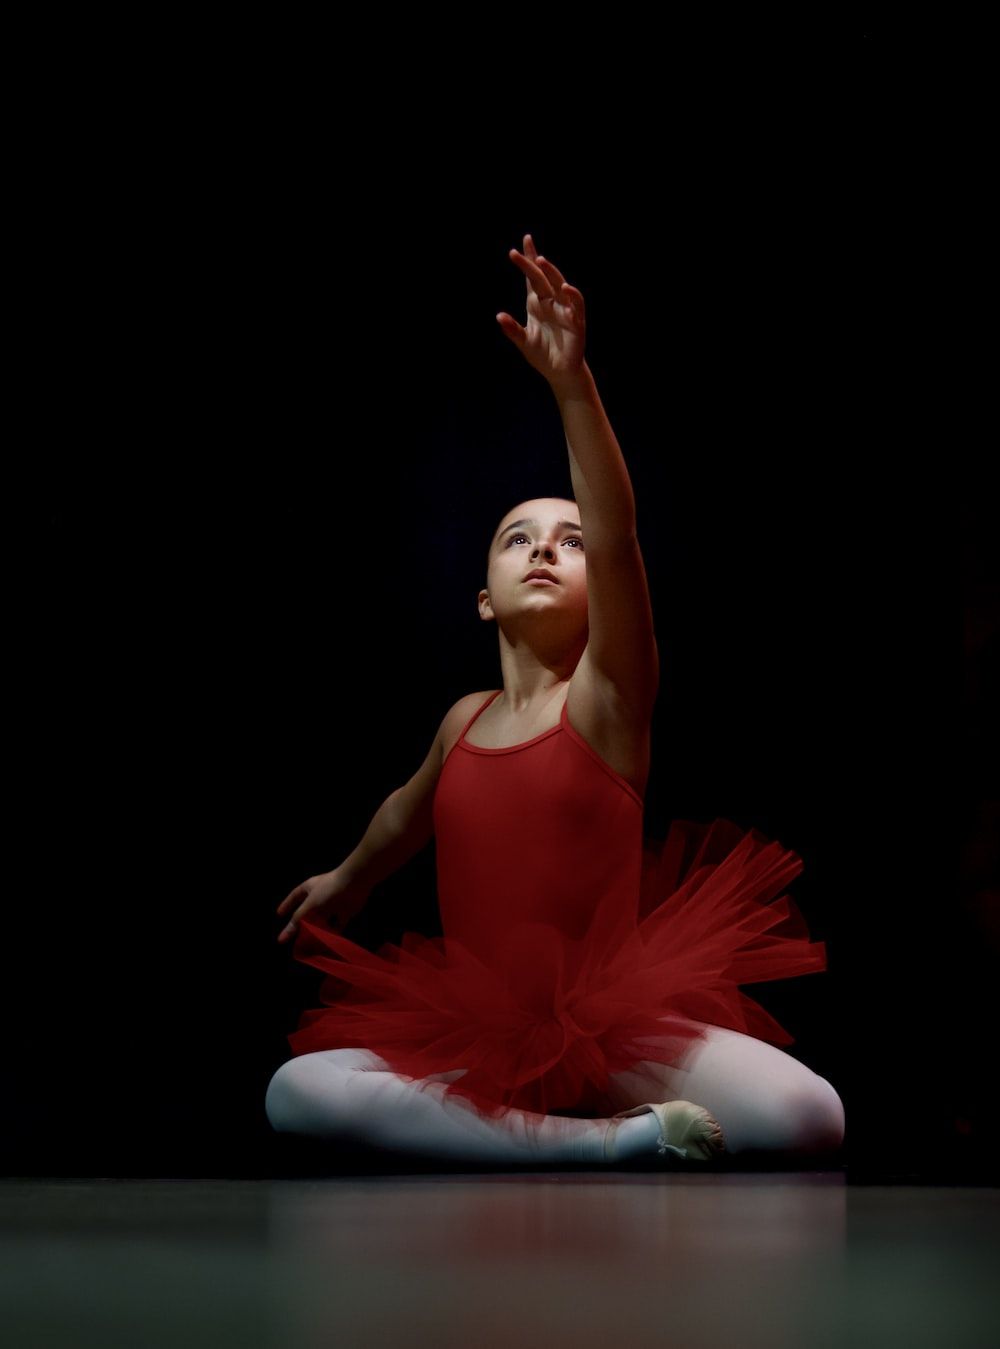 A young girl in red ballet outfit sitting on the floor - Ballet, dance